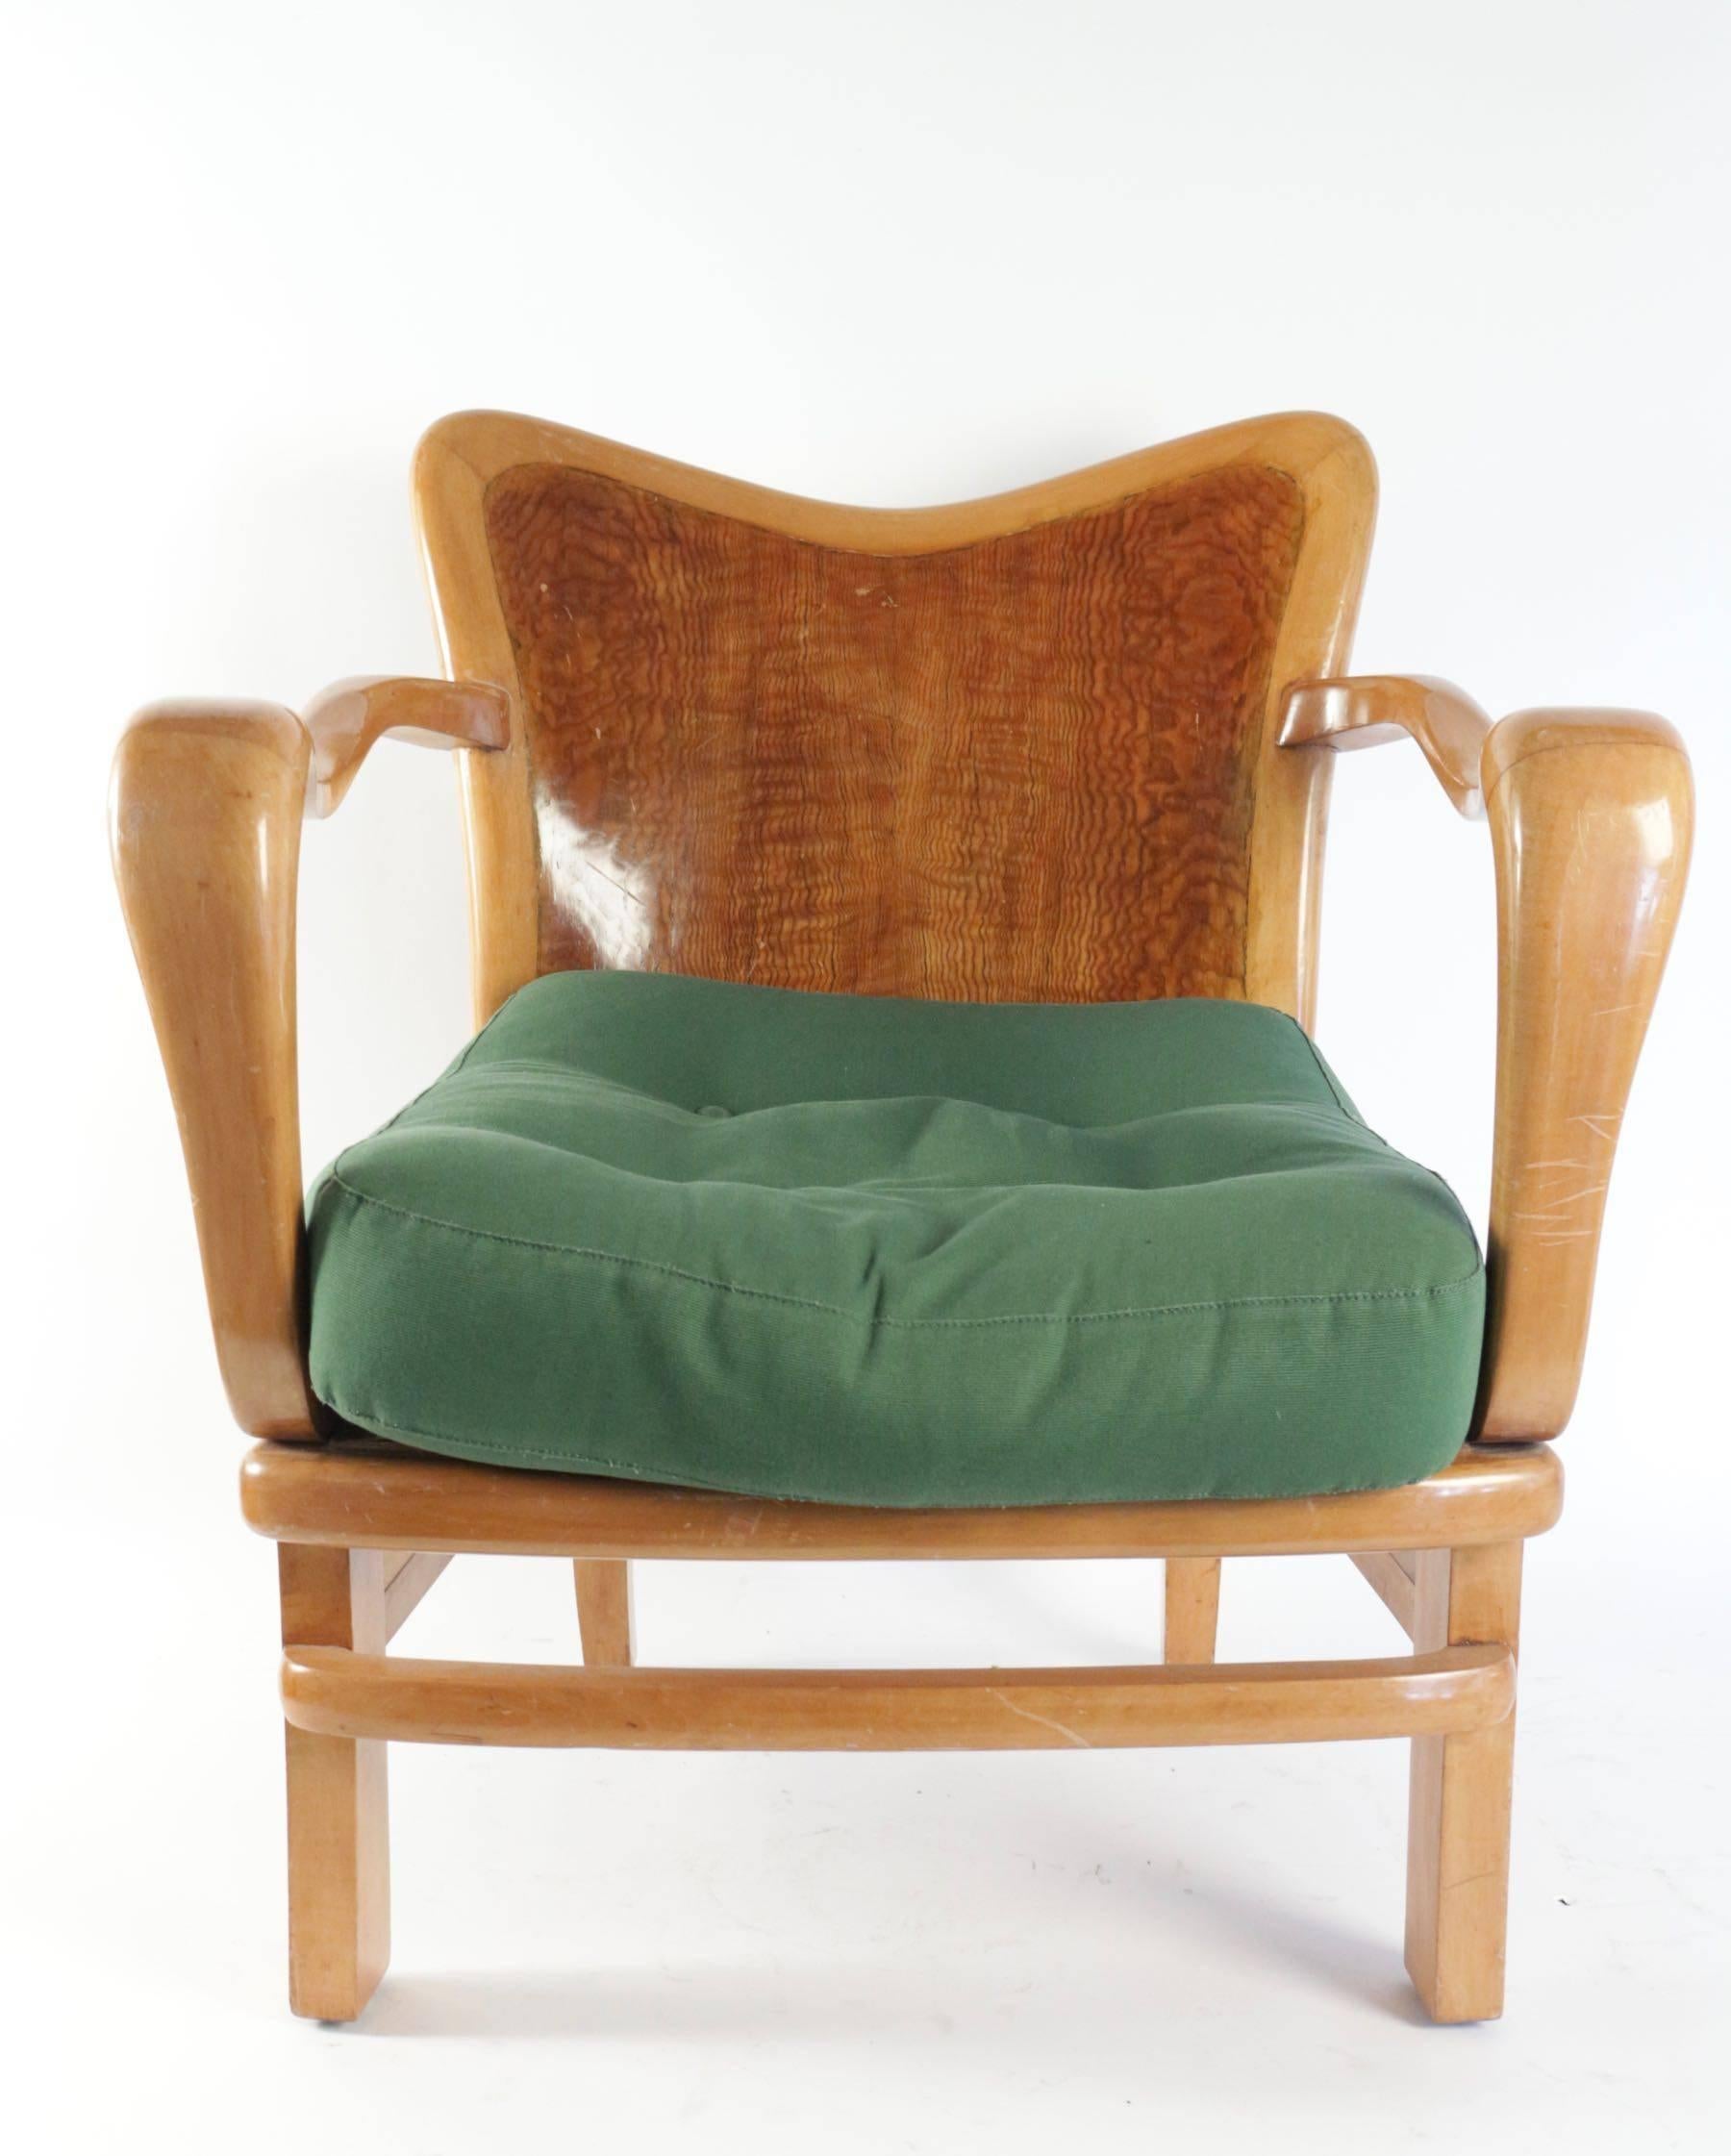 Rare Vittorio Valabrega armchair.
It is in birch and sycamore veneer.
Very nice design for this armchair.
Italy, circa 1920.
Measures: Height. 76 cm Depth. 63 cm Width. 67 cm
Seat height. 41 cm.